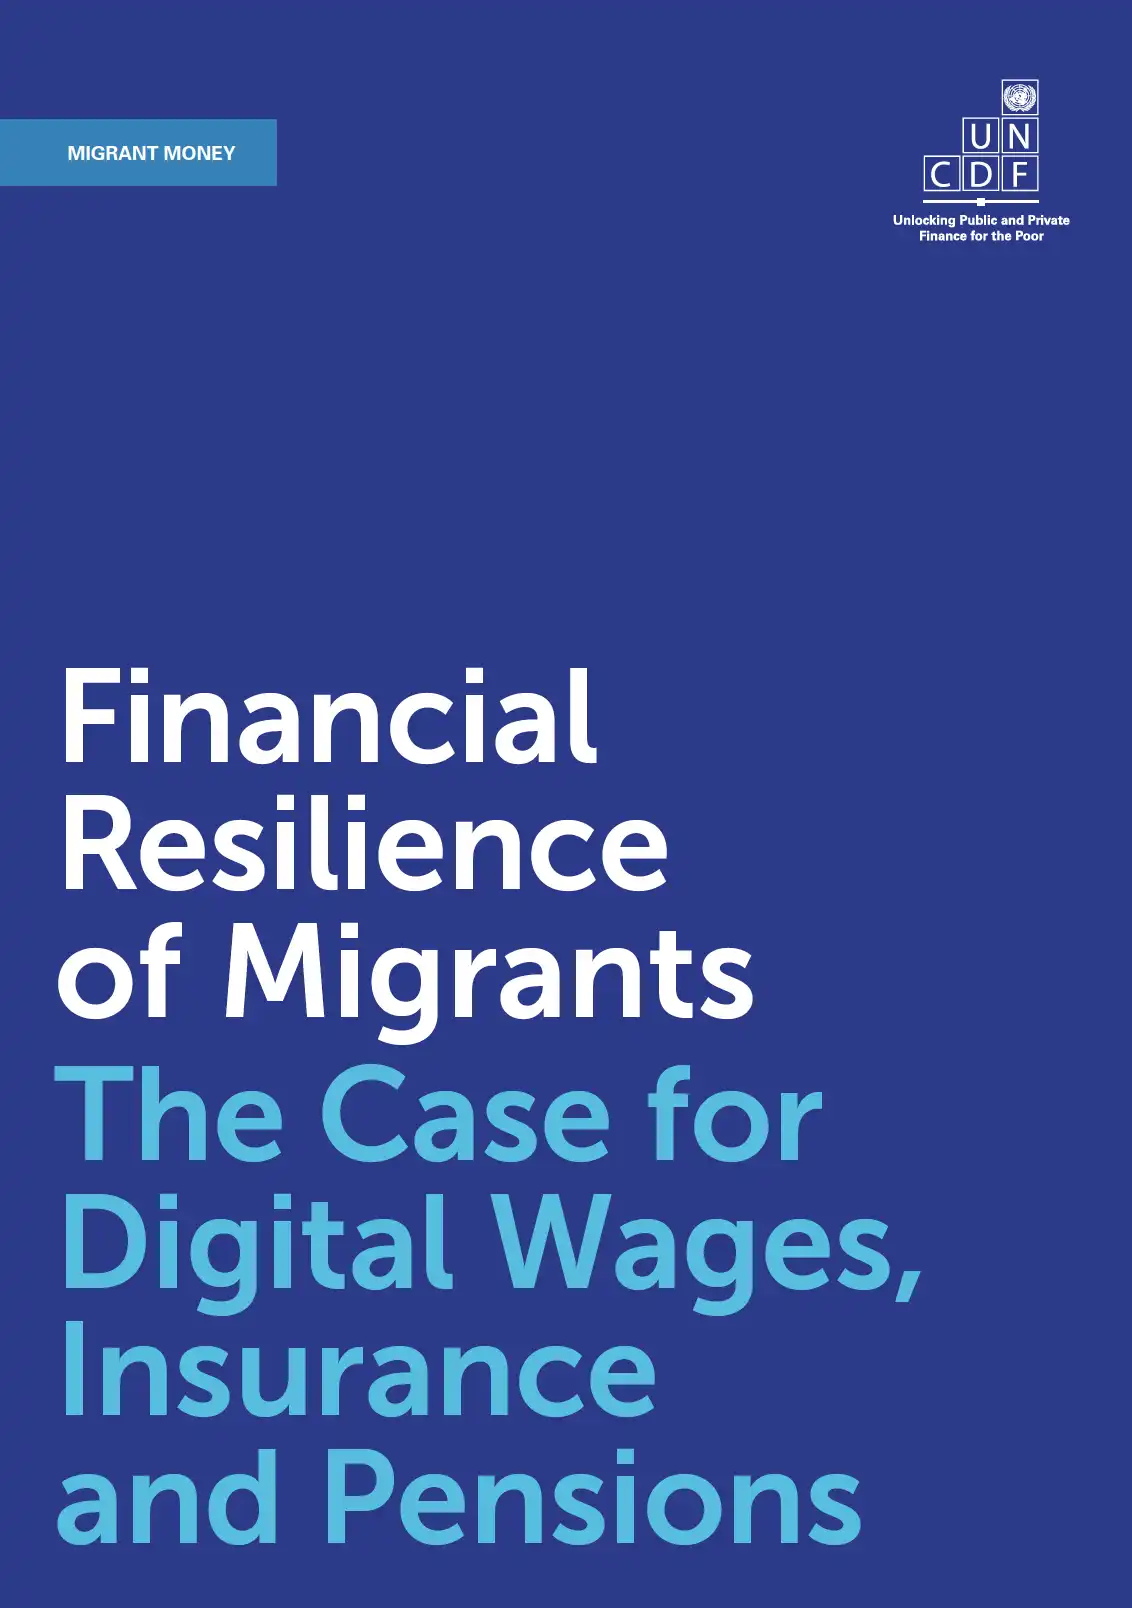 The Case for Digital Wages, Insurance, and Pensions for Migrant Financial Resilience